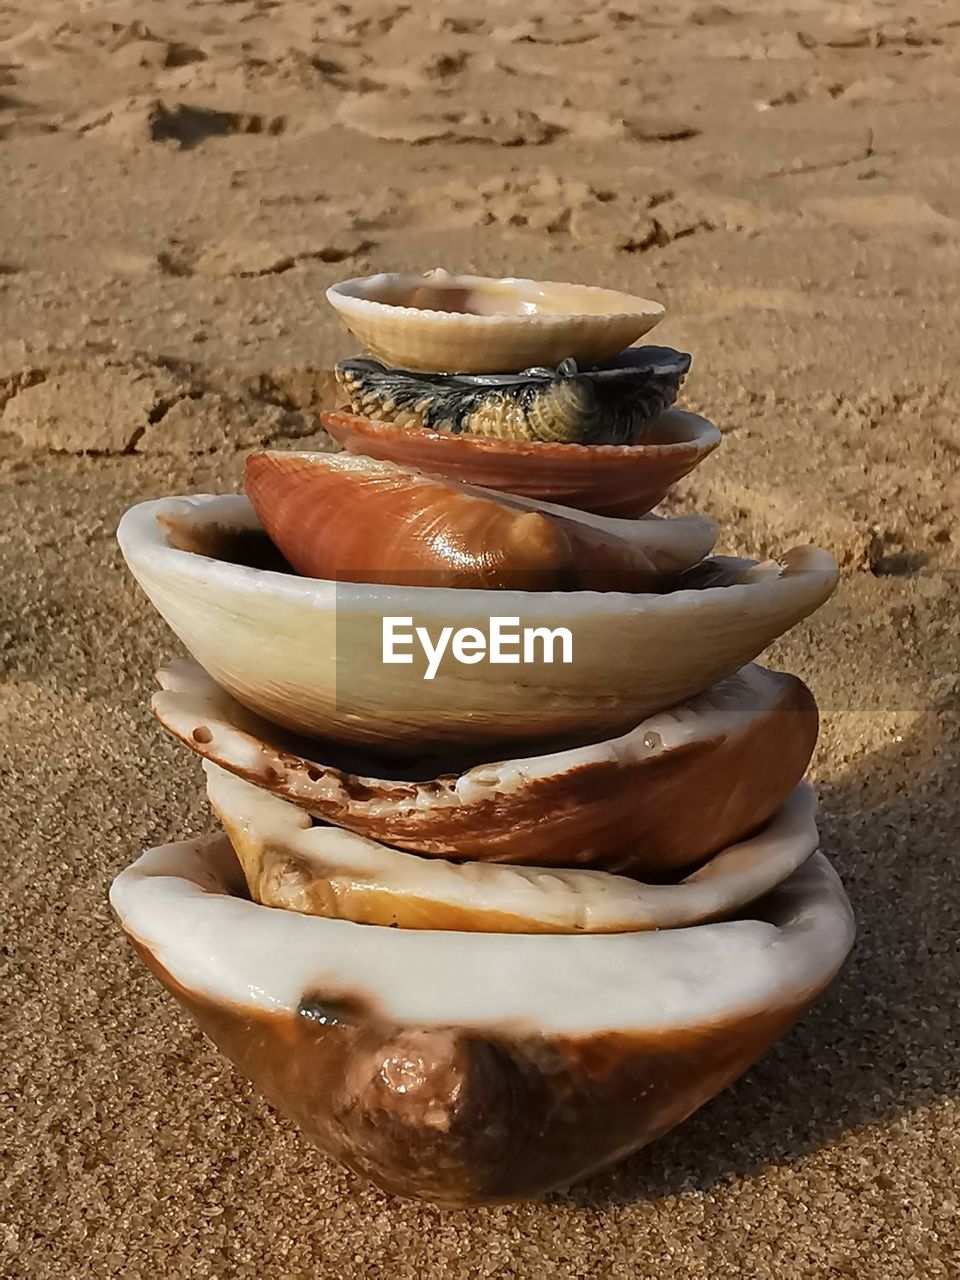 sand, land, beach, no people, shell, nature, wood, food, food and drink, day, high angle view, group of objects, wellbeing, sunlight, ceramic, healthy eating, outdoors, bowl